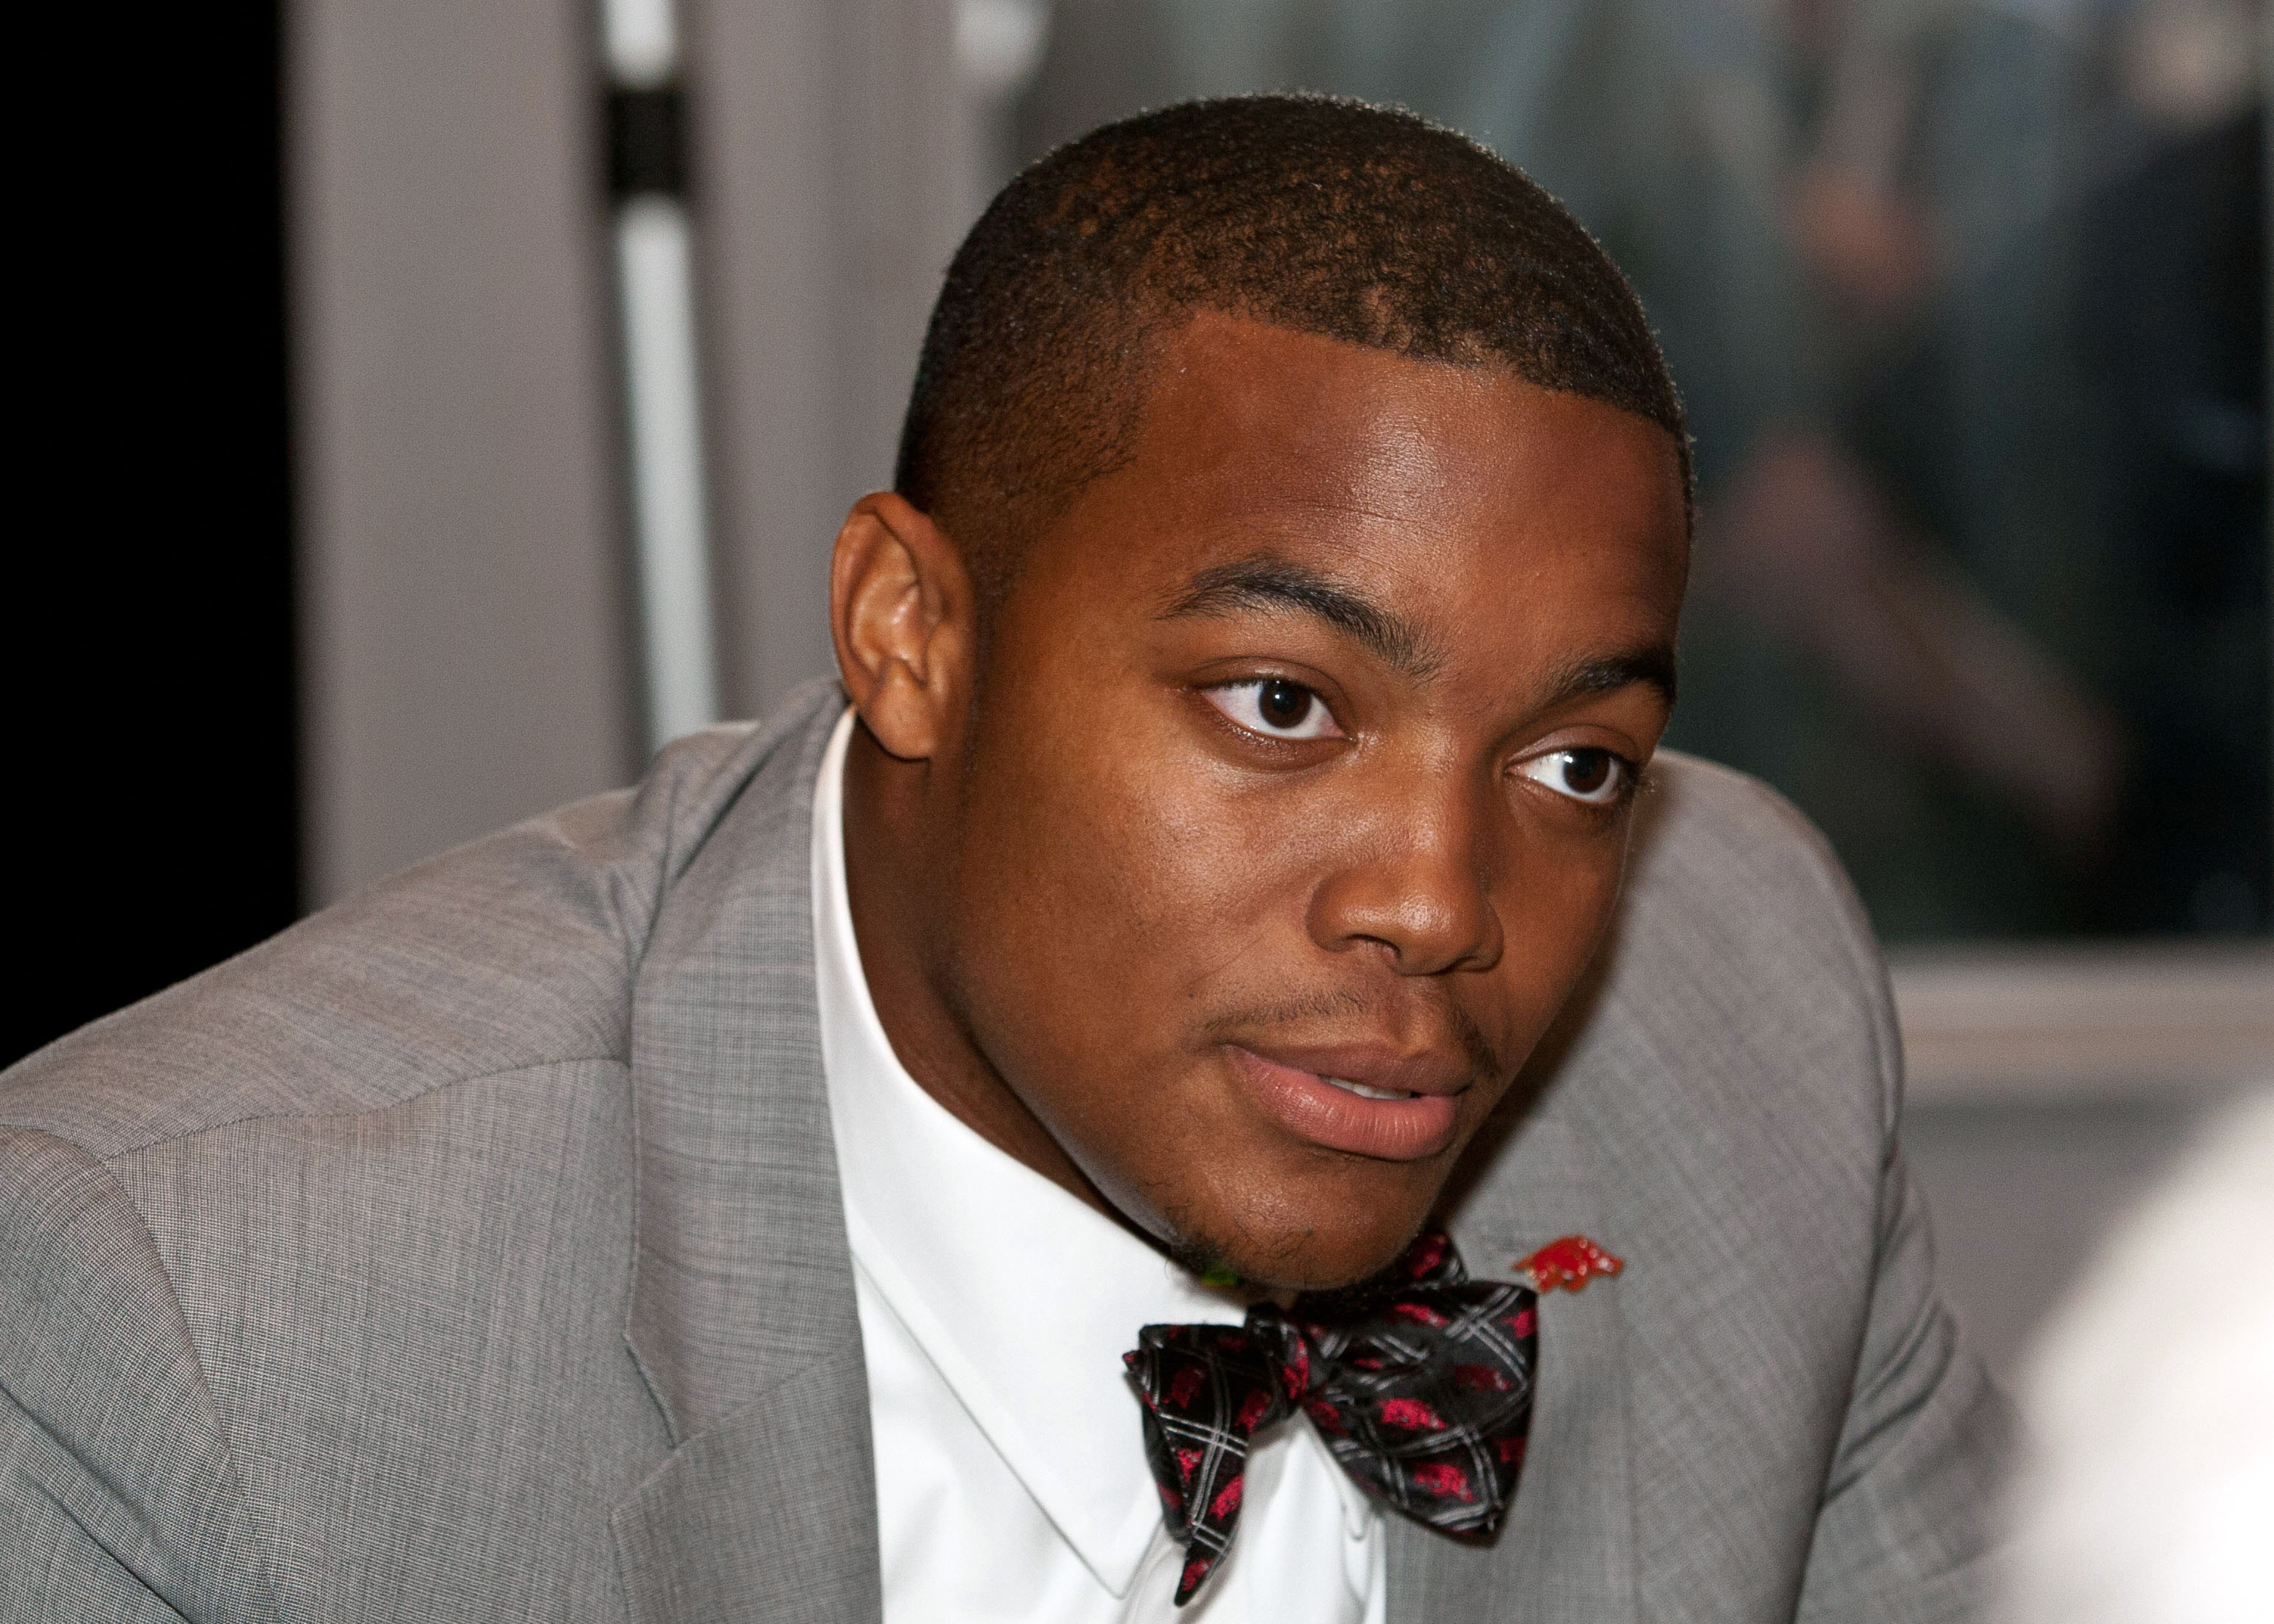 I think we'd all love to see Trey Flowers wearing that bowtie again while accepting National Accolades.